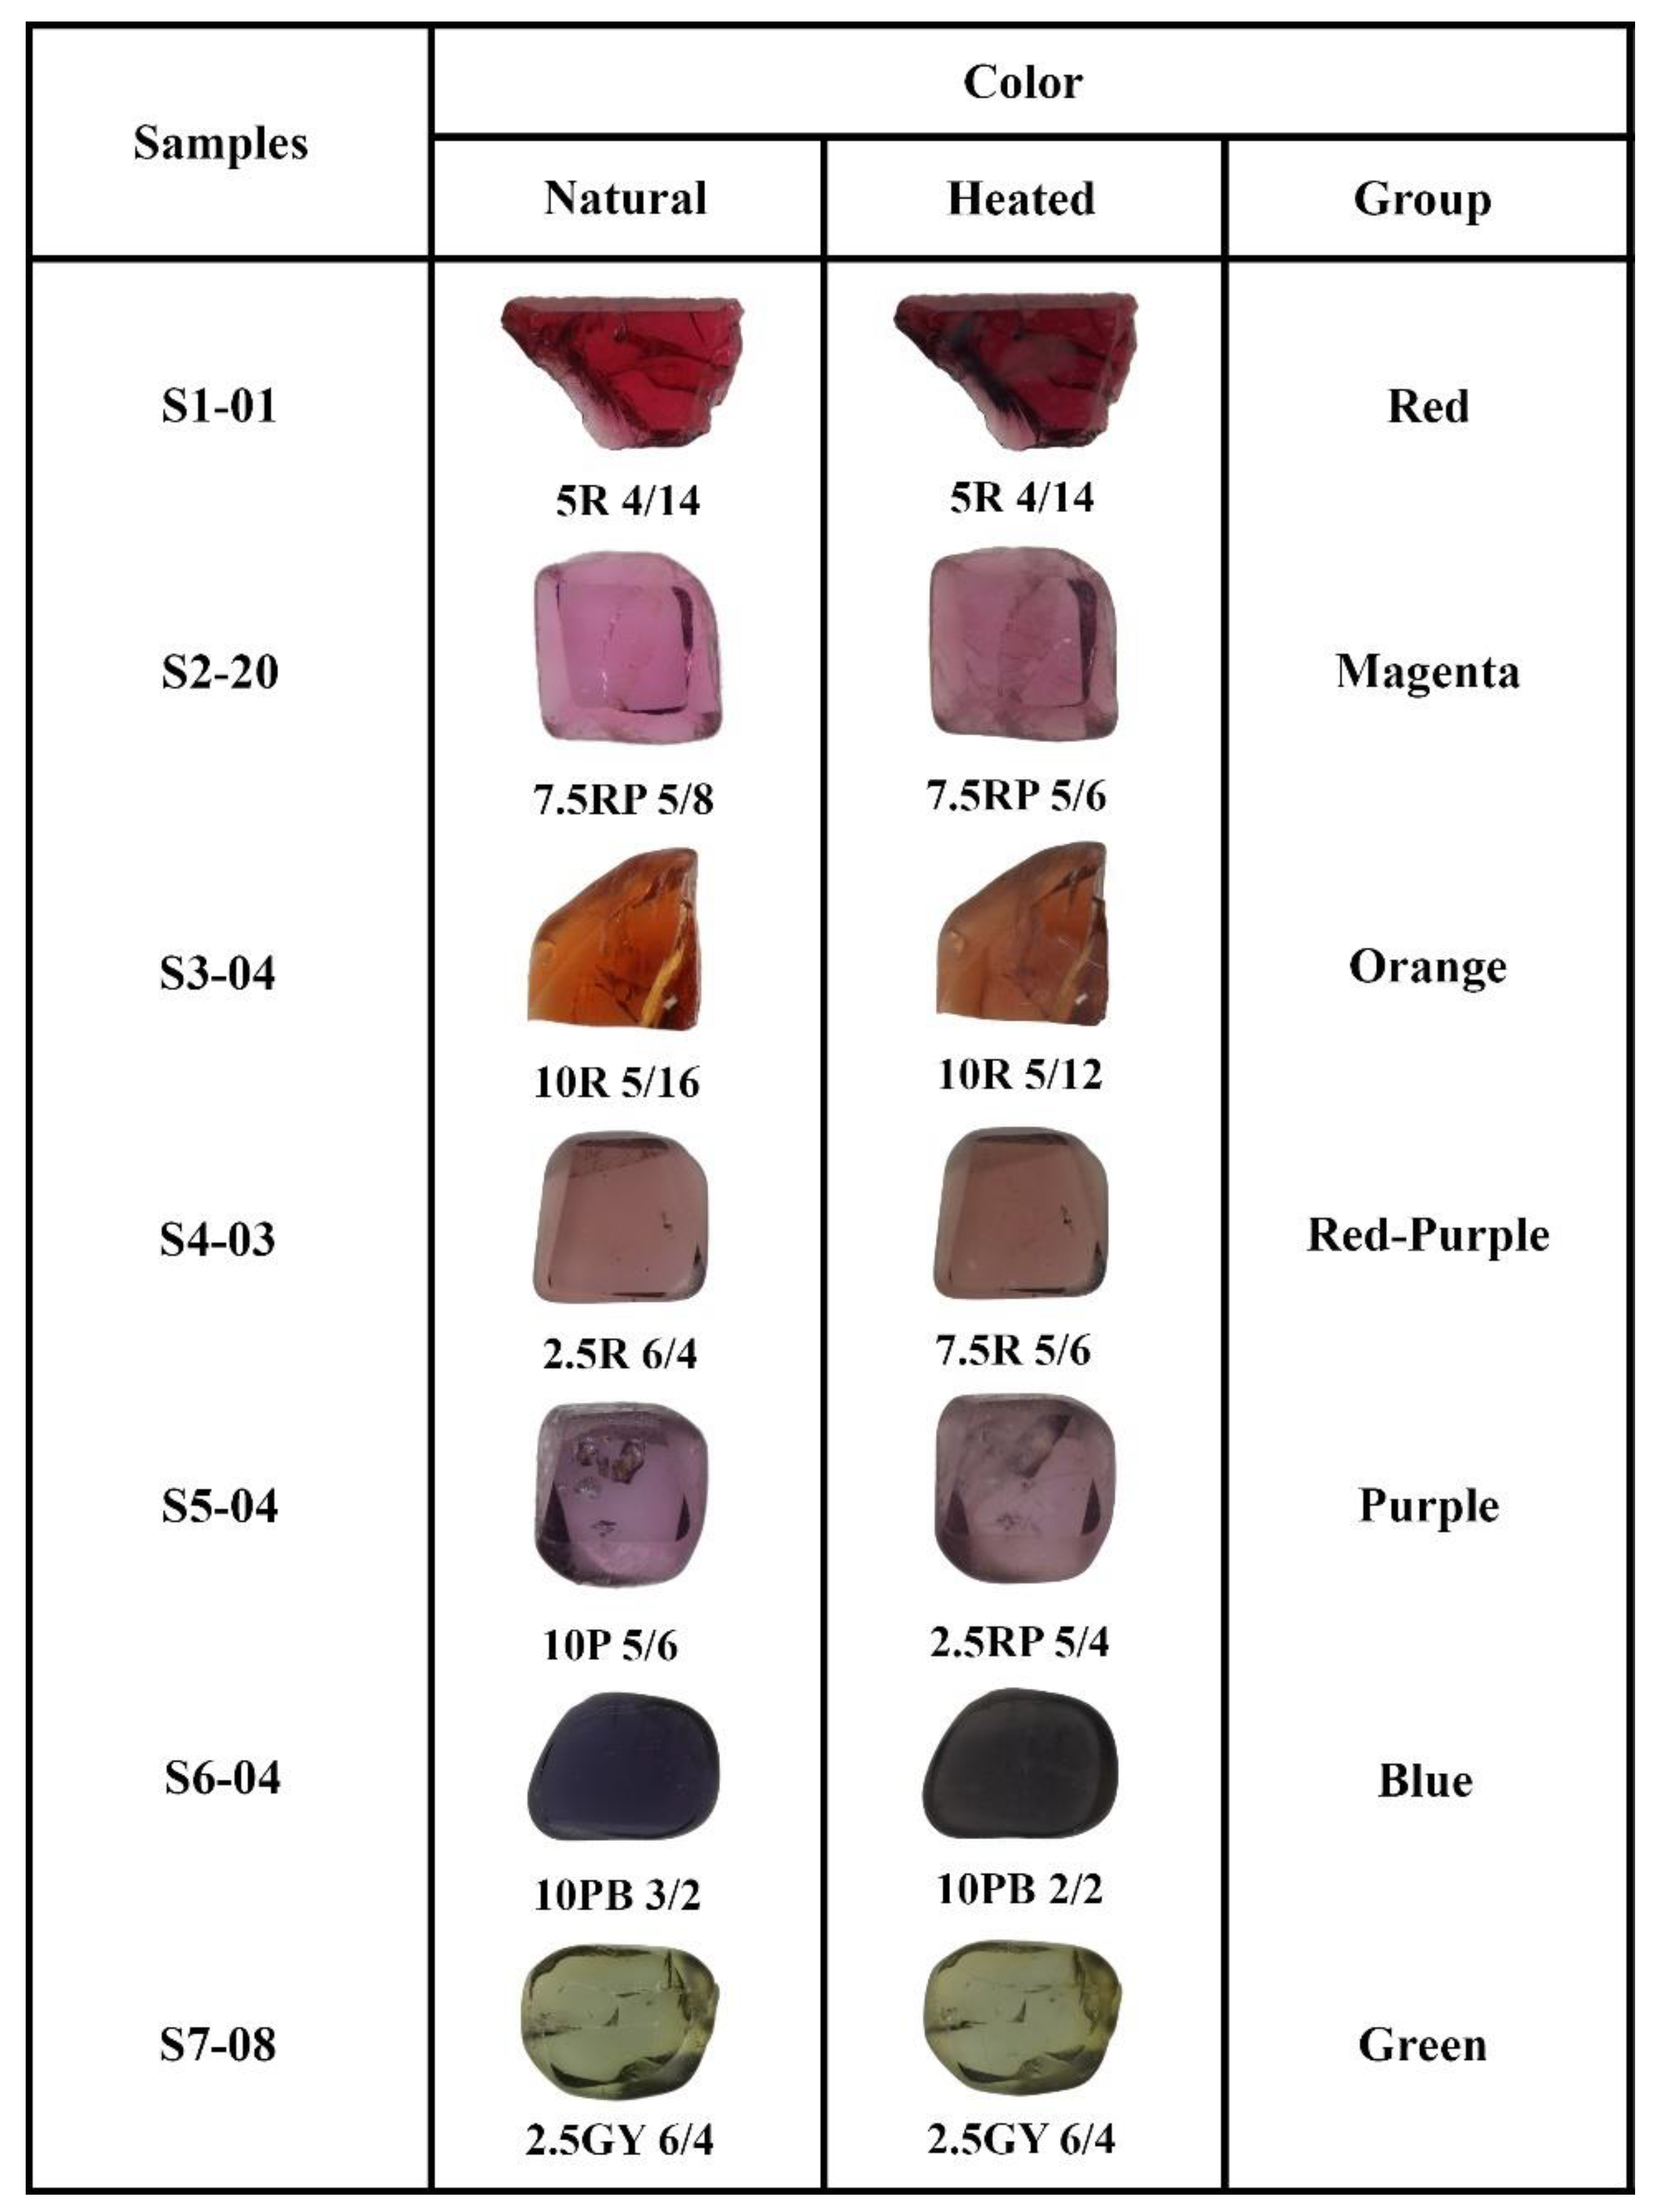 Zn-Rich Spinel in Association with Quartz in the Al-Rich